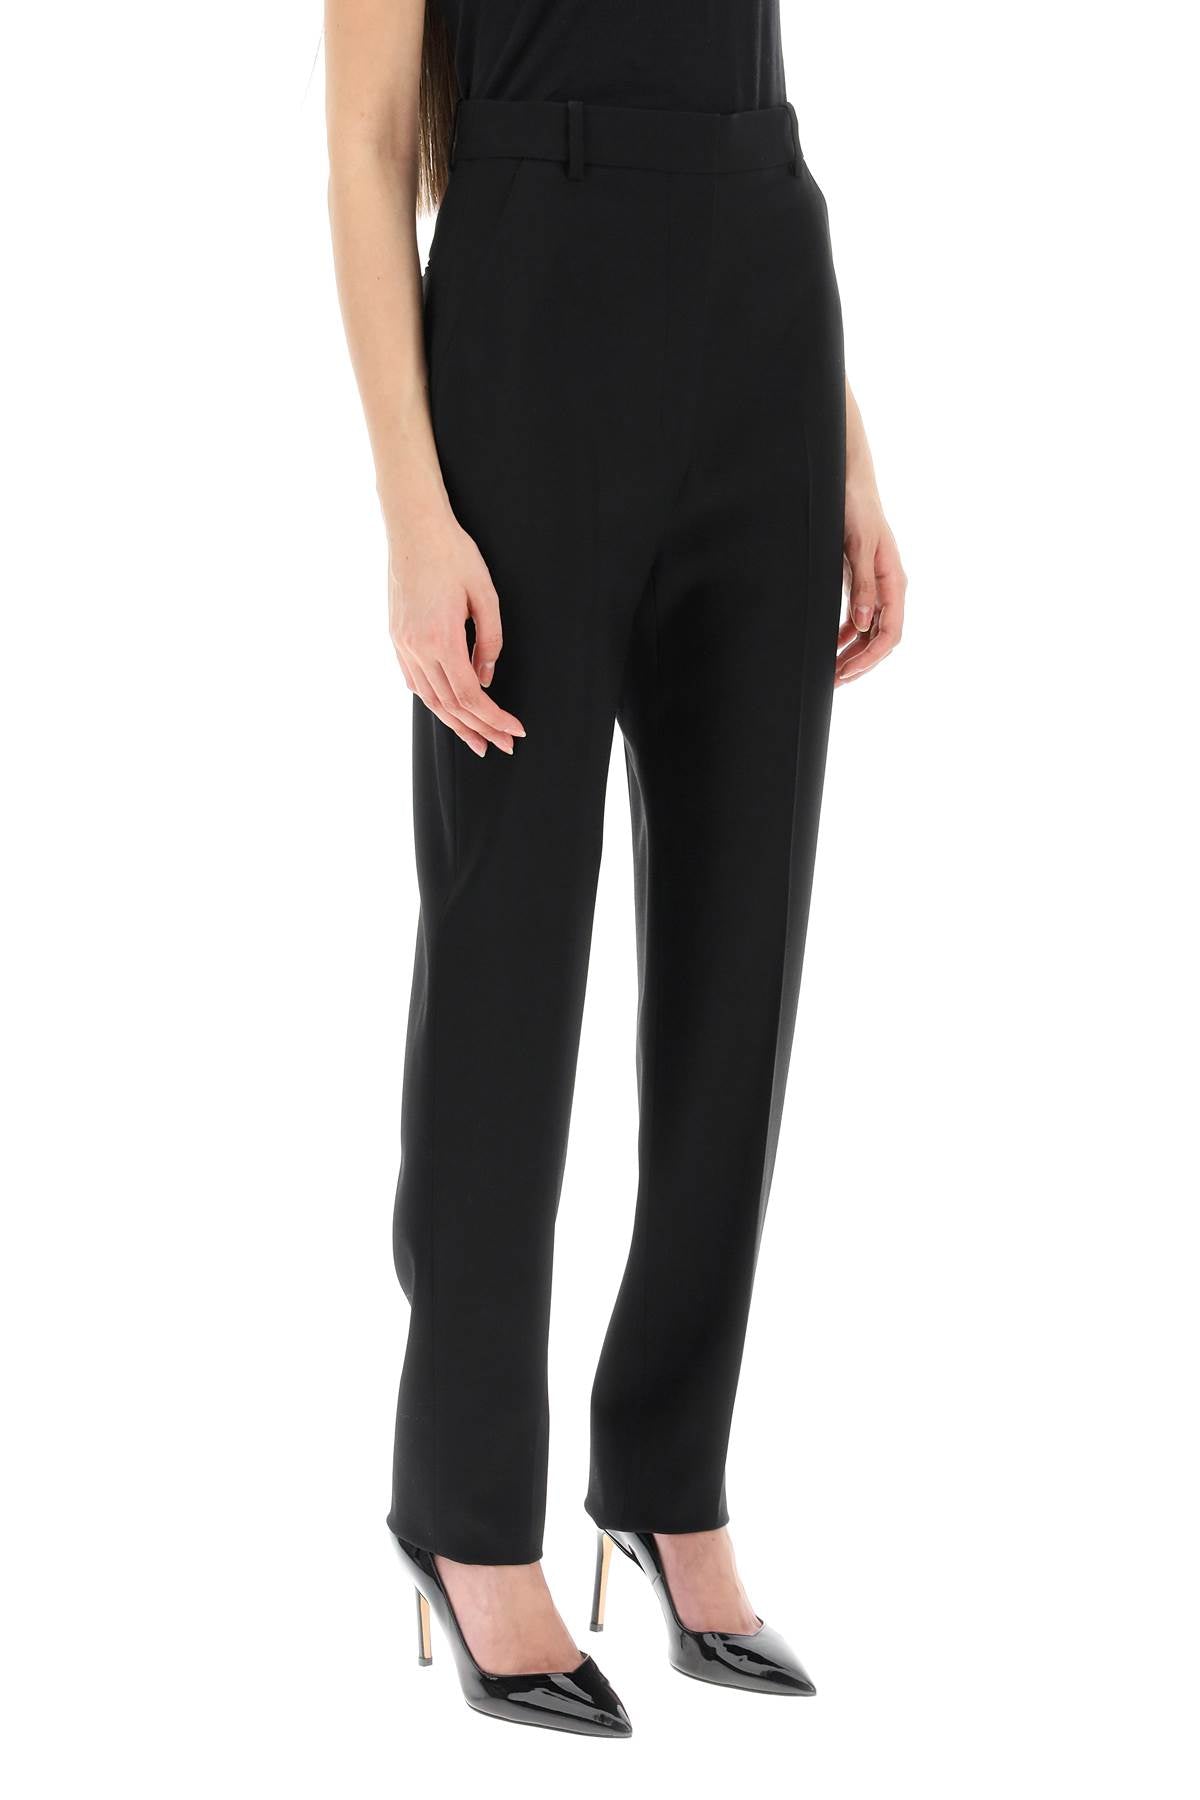 ALEXANDER MCQUEEN Classic High-Waisted Black Cigarette Trousers for Women